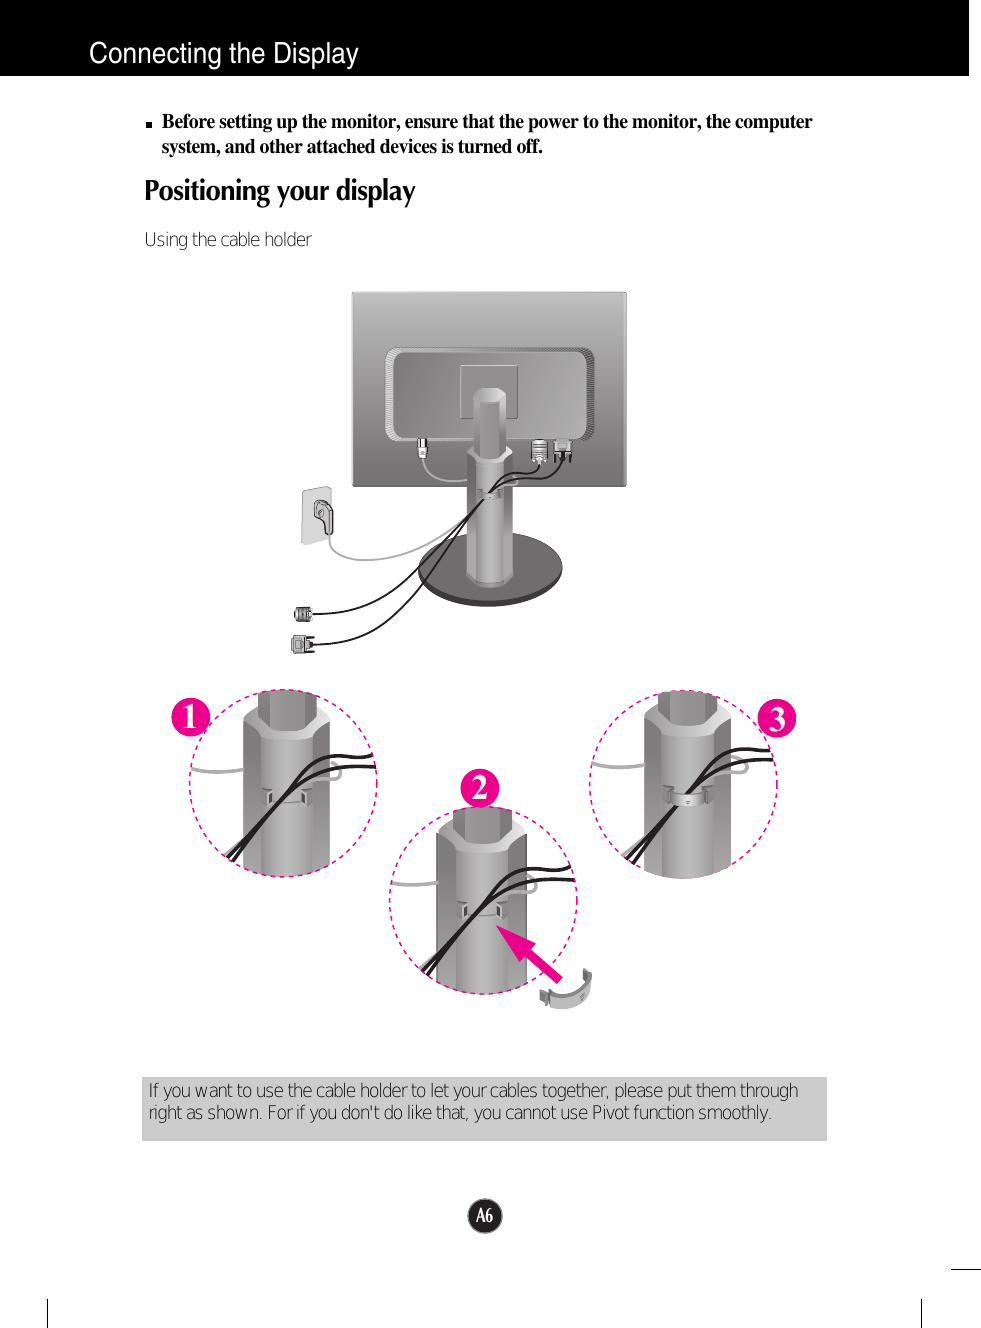 A6Connecting the DisplayBefore setting up the monitor, ensure that the power to the monitor, the computersystem, and other attached devices is turned off.Positioning your display Using the cable holder123If you want to use the cable holder to let your cables together, please put them throughright as shown. For if you don&apos;t do like that, you cannot use Pivot function smoothly.